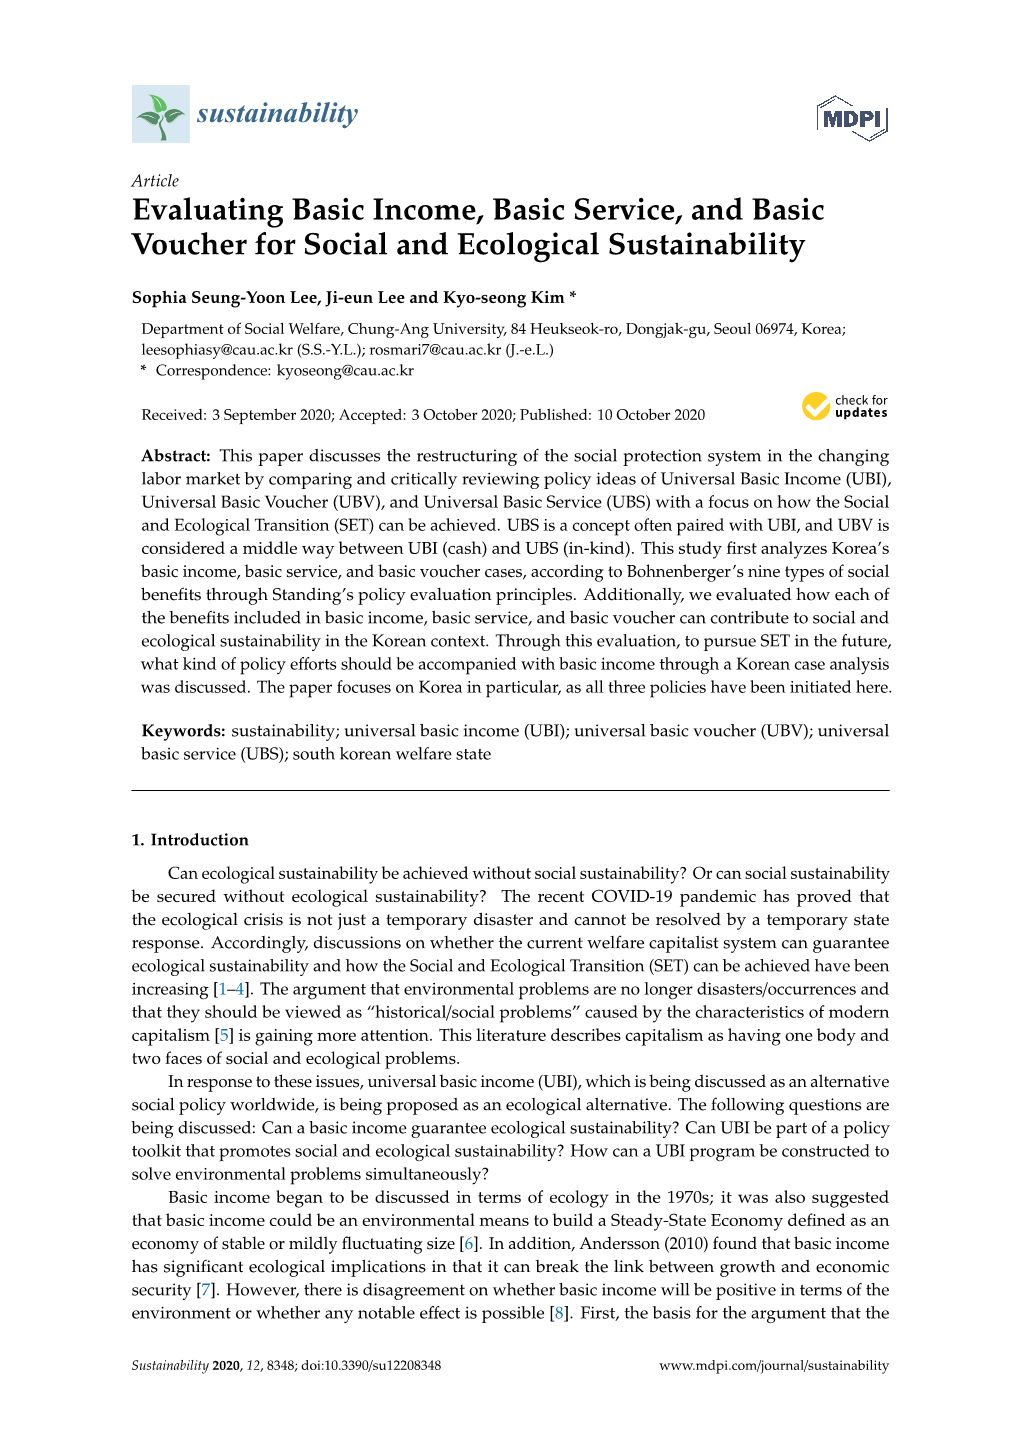 Evaluating Basic Income, Basic Service, and Basic Voucher for Social and Ecological Sustainability